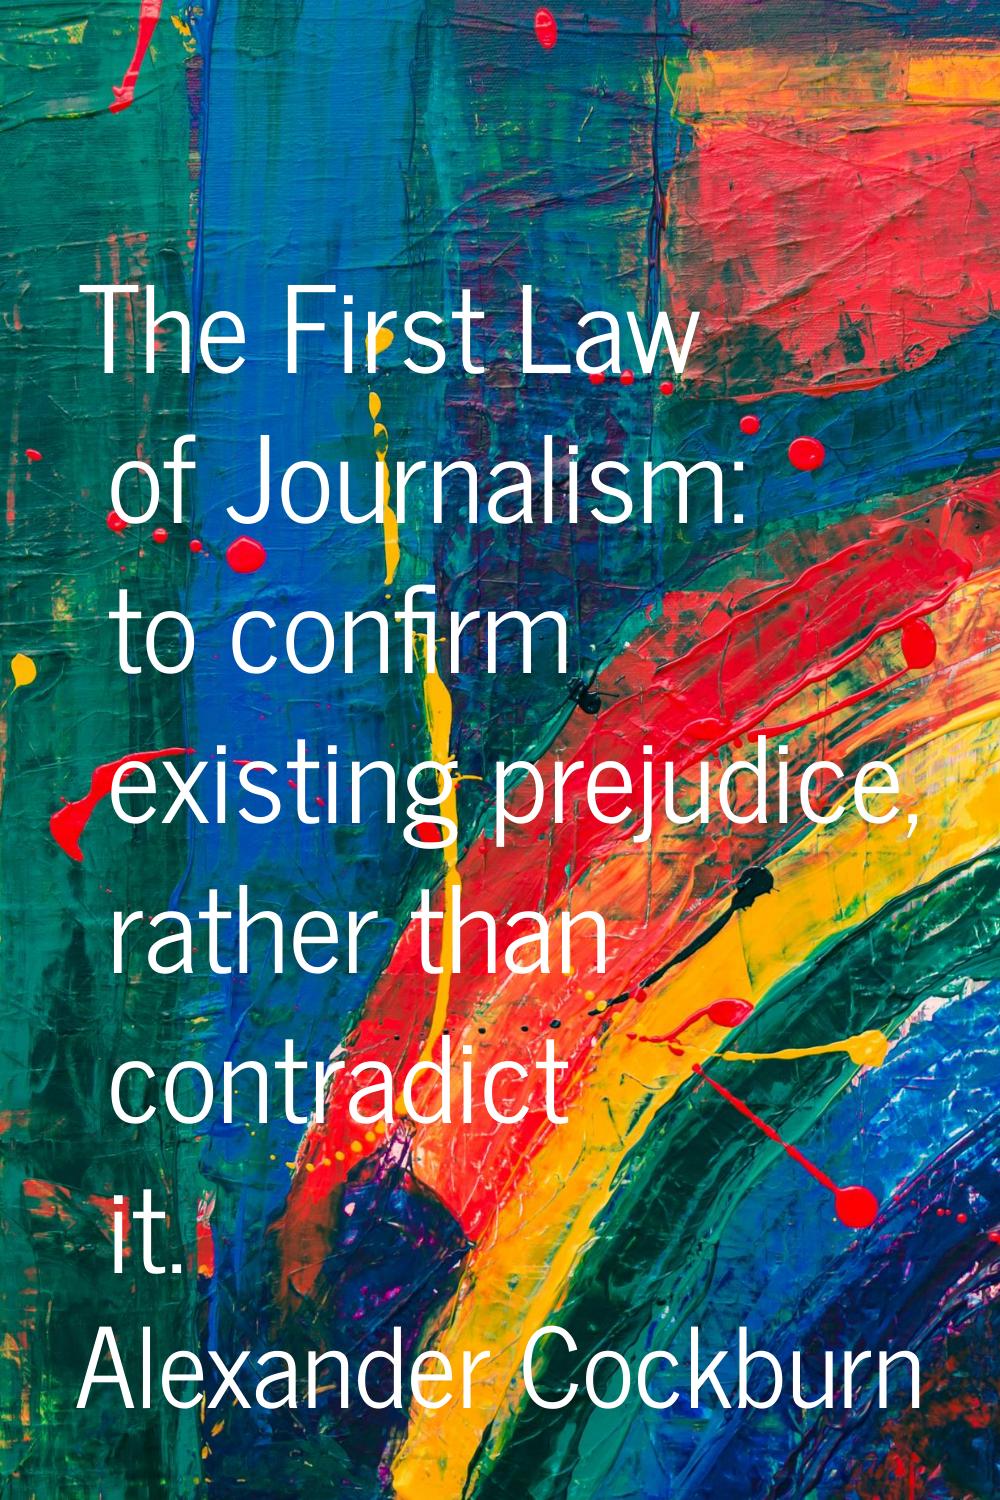 The First Law of Journalism: to confirm existing prejudice, rather than contradict it.